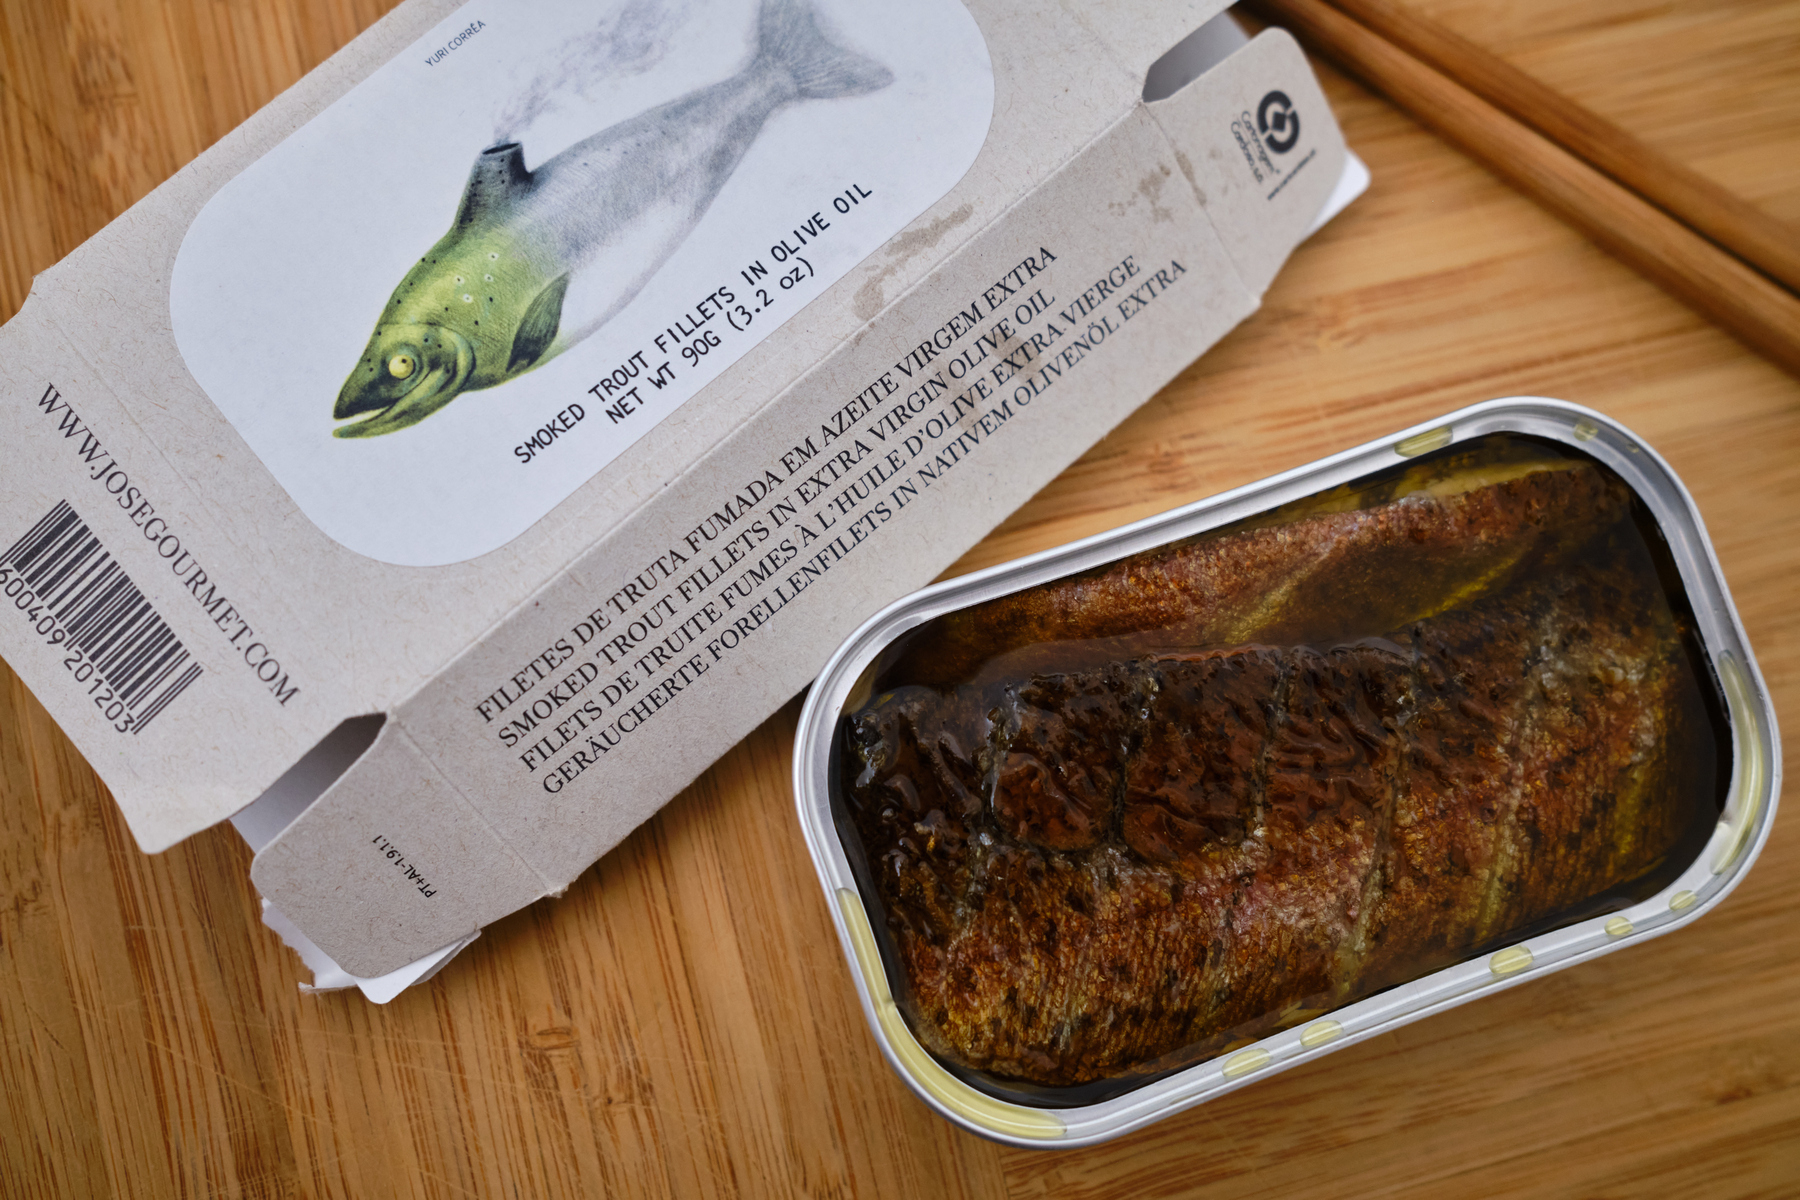 an open rectangular tin of Jose Gourmet's smoked trout in olive oil, positioned next to the art on the package. 